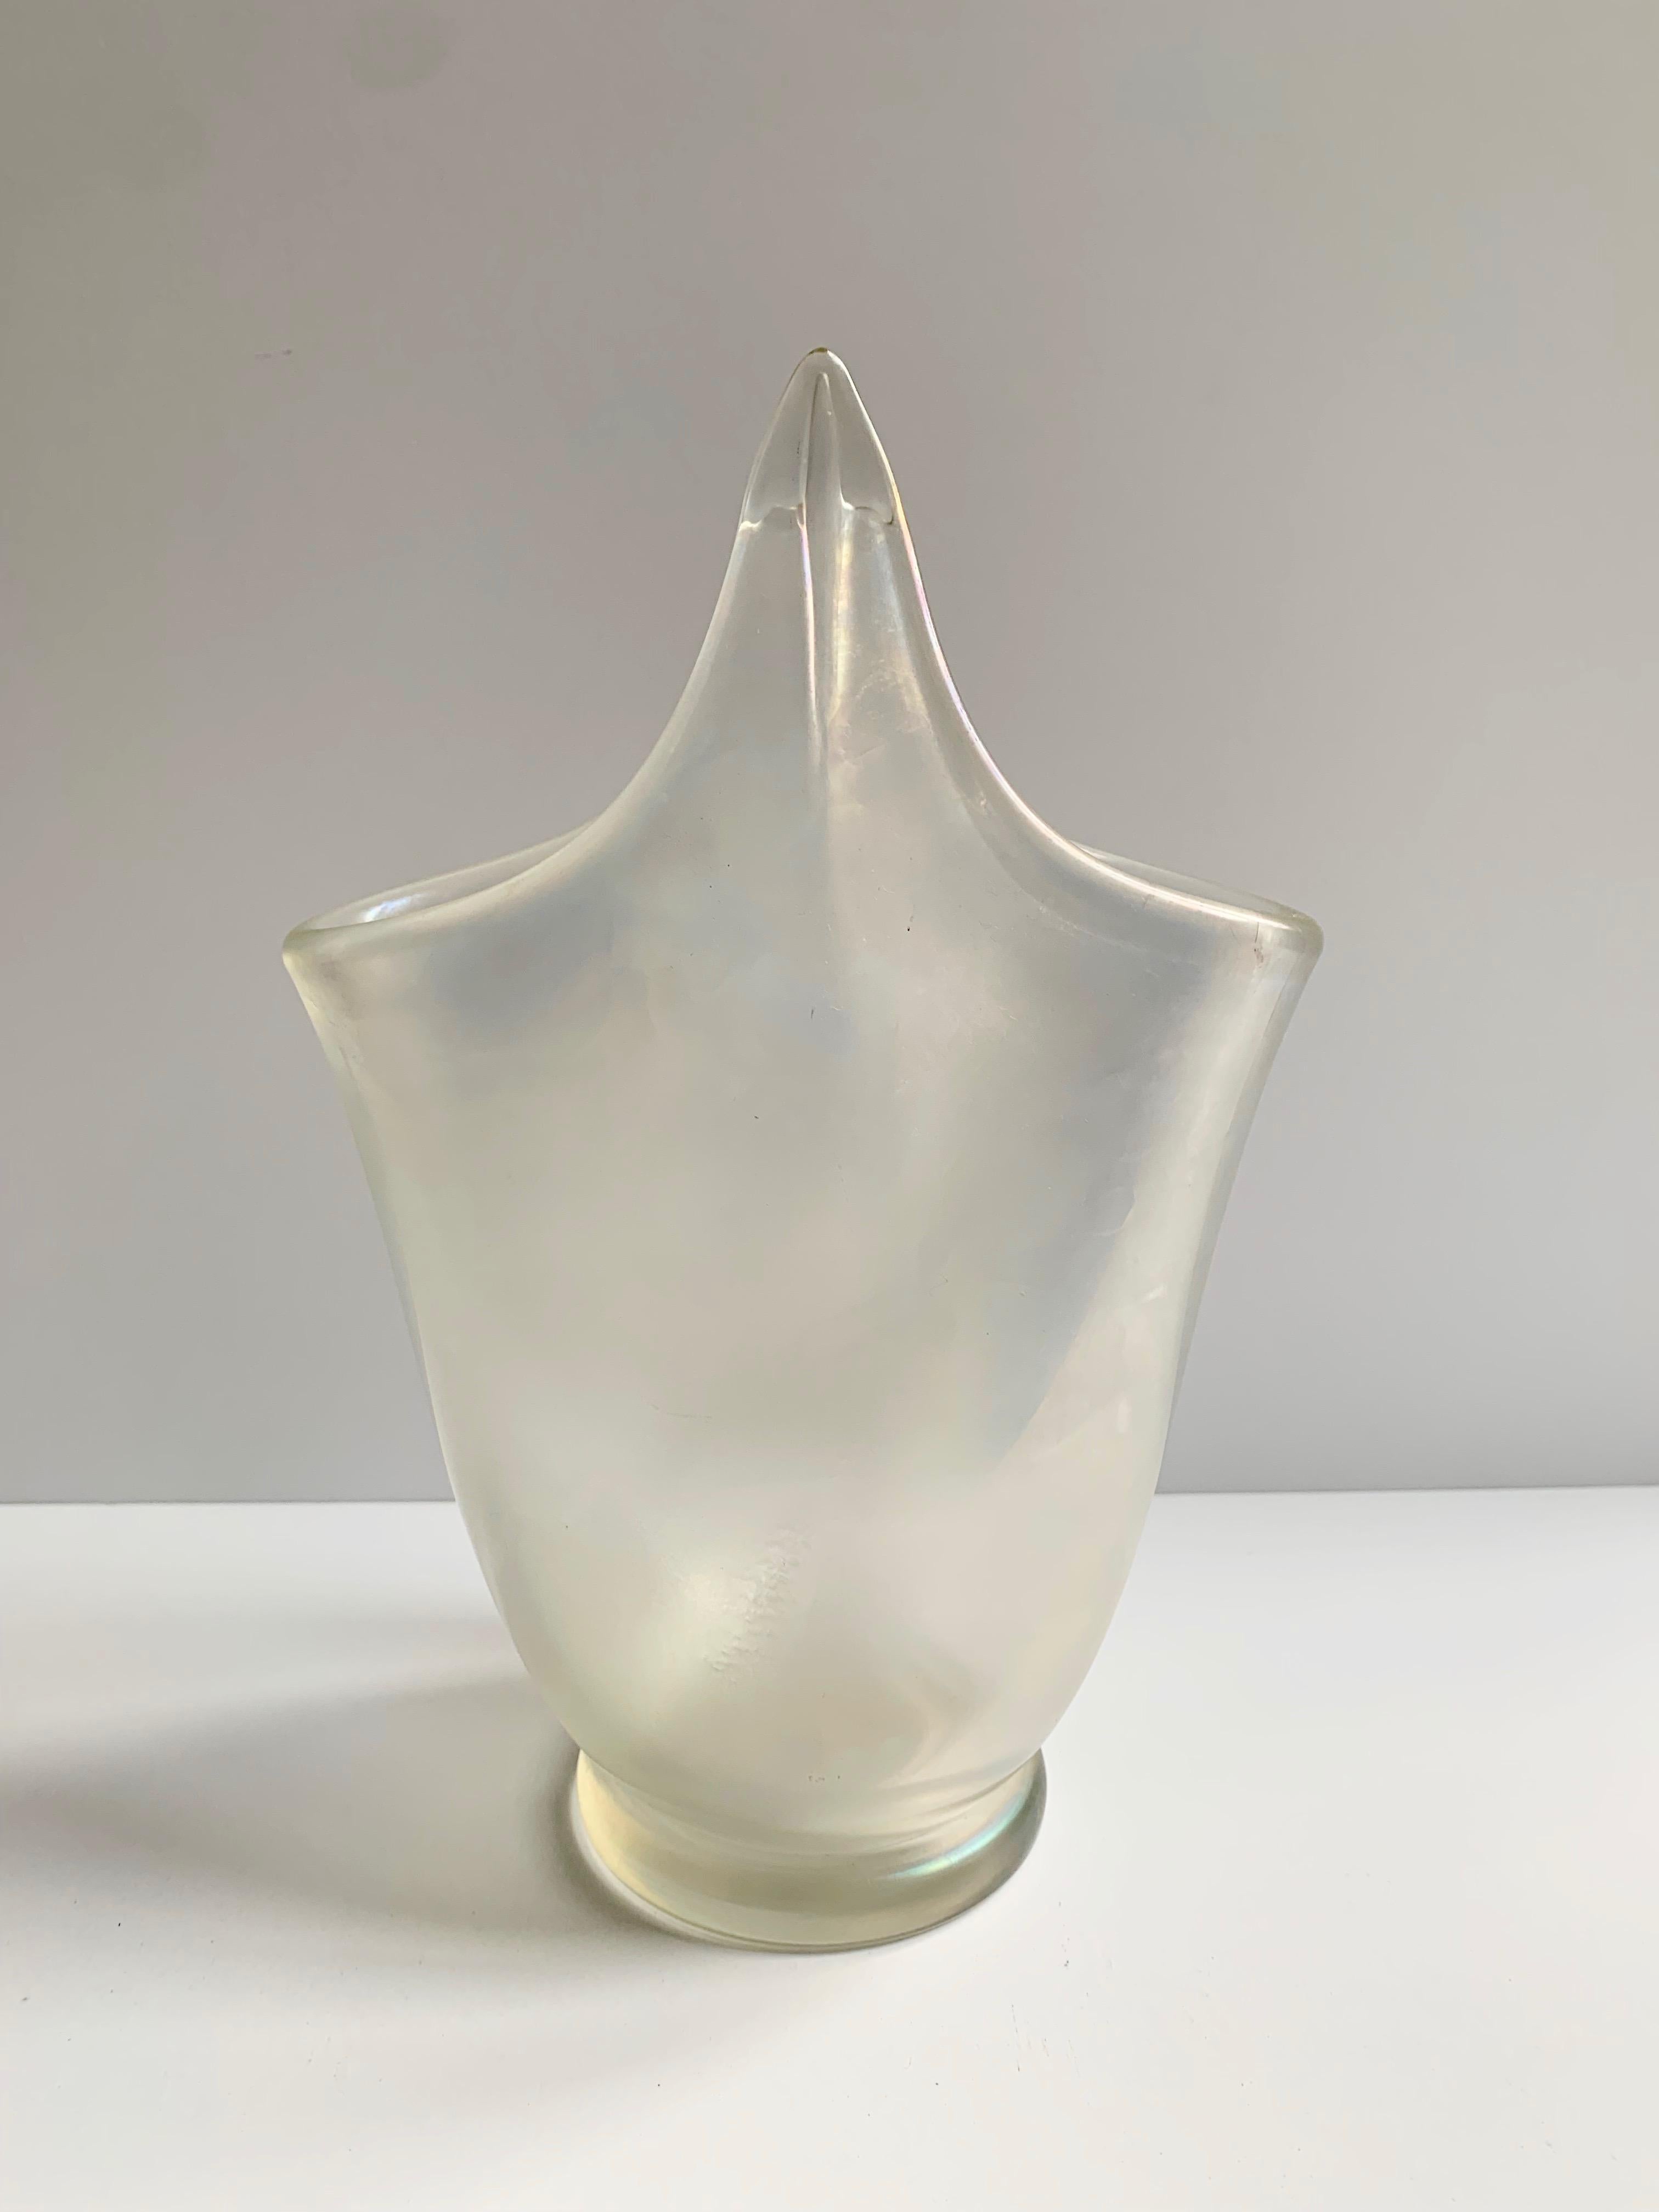 Beautifully styled Barovier Toso vase, opaque and translucent. Signed on underneath.